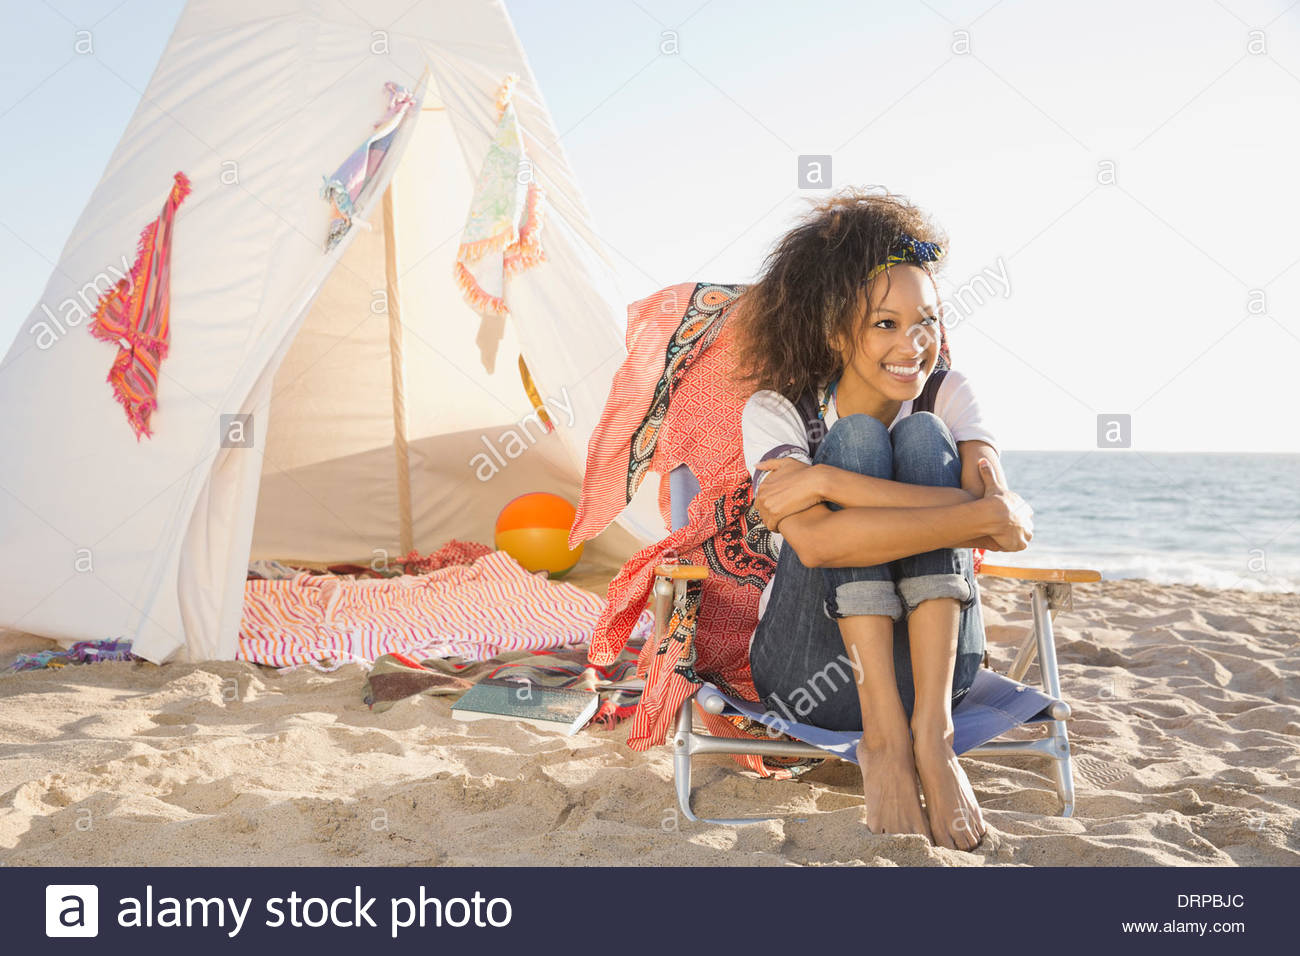 Smiling woman hugging knees by tent on beach Stock Photo